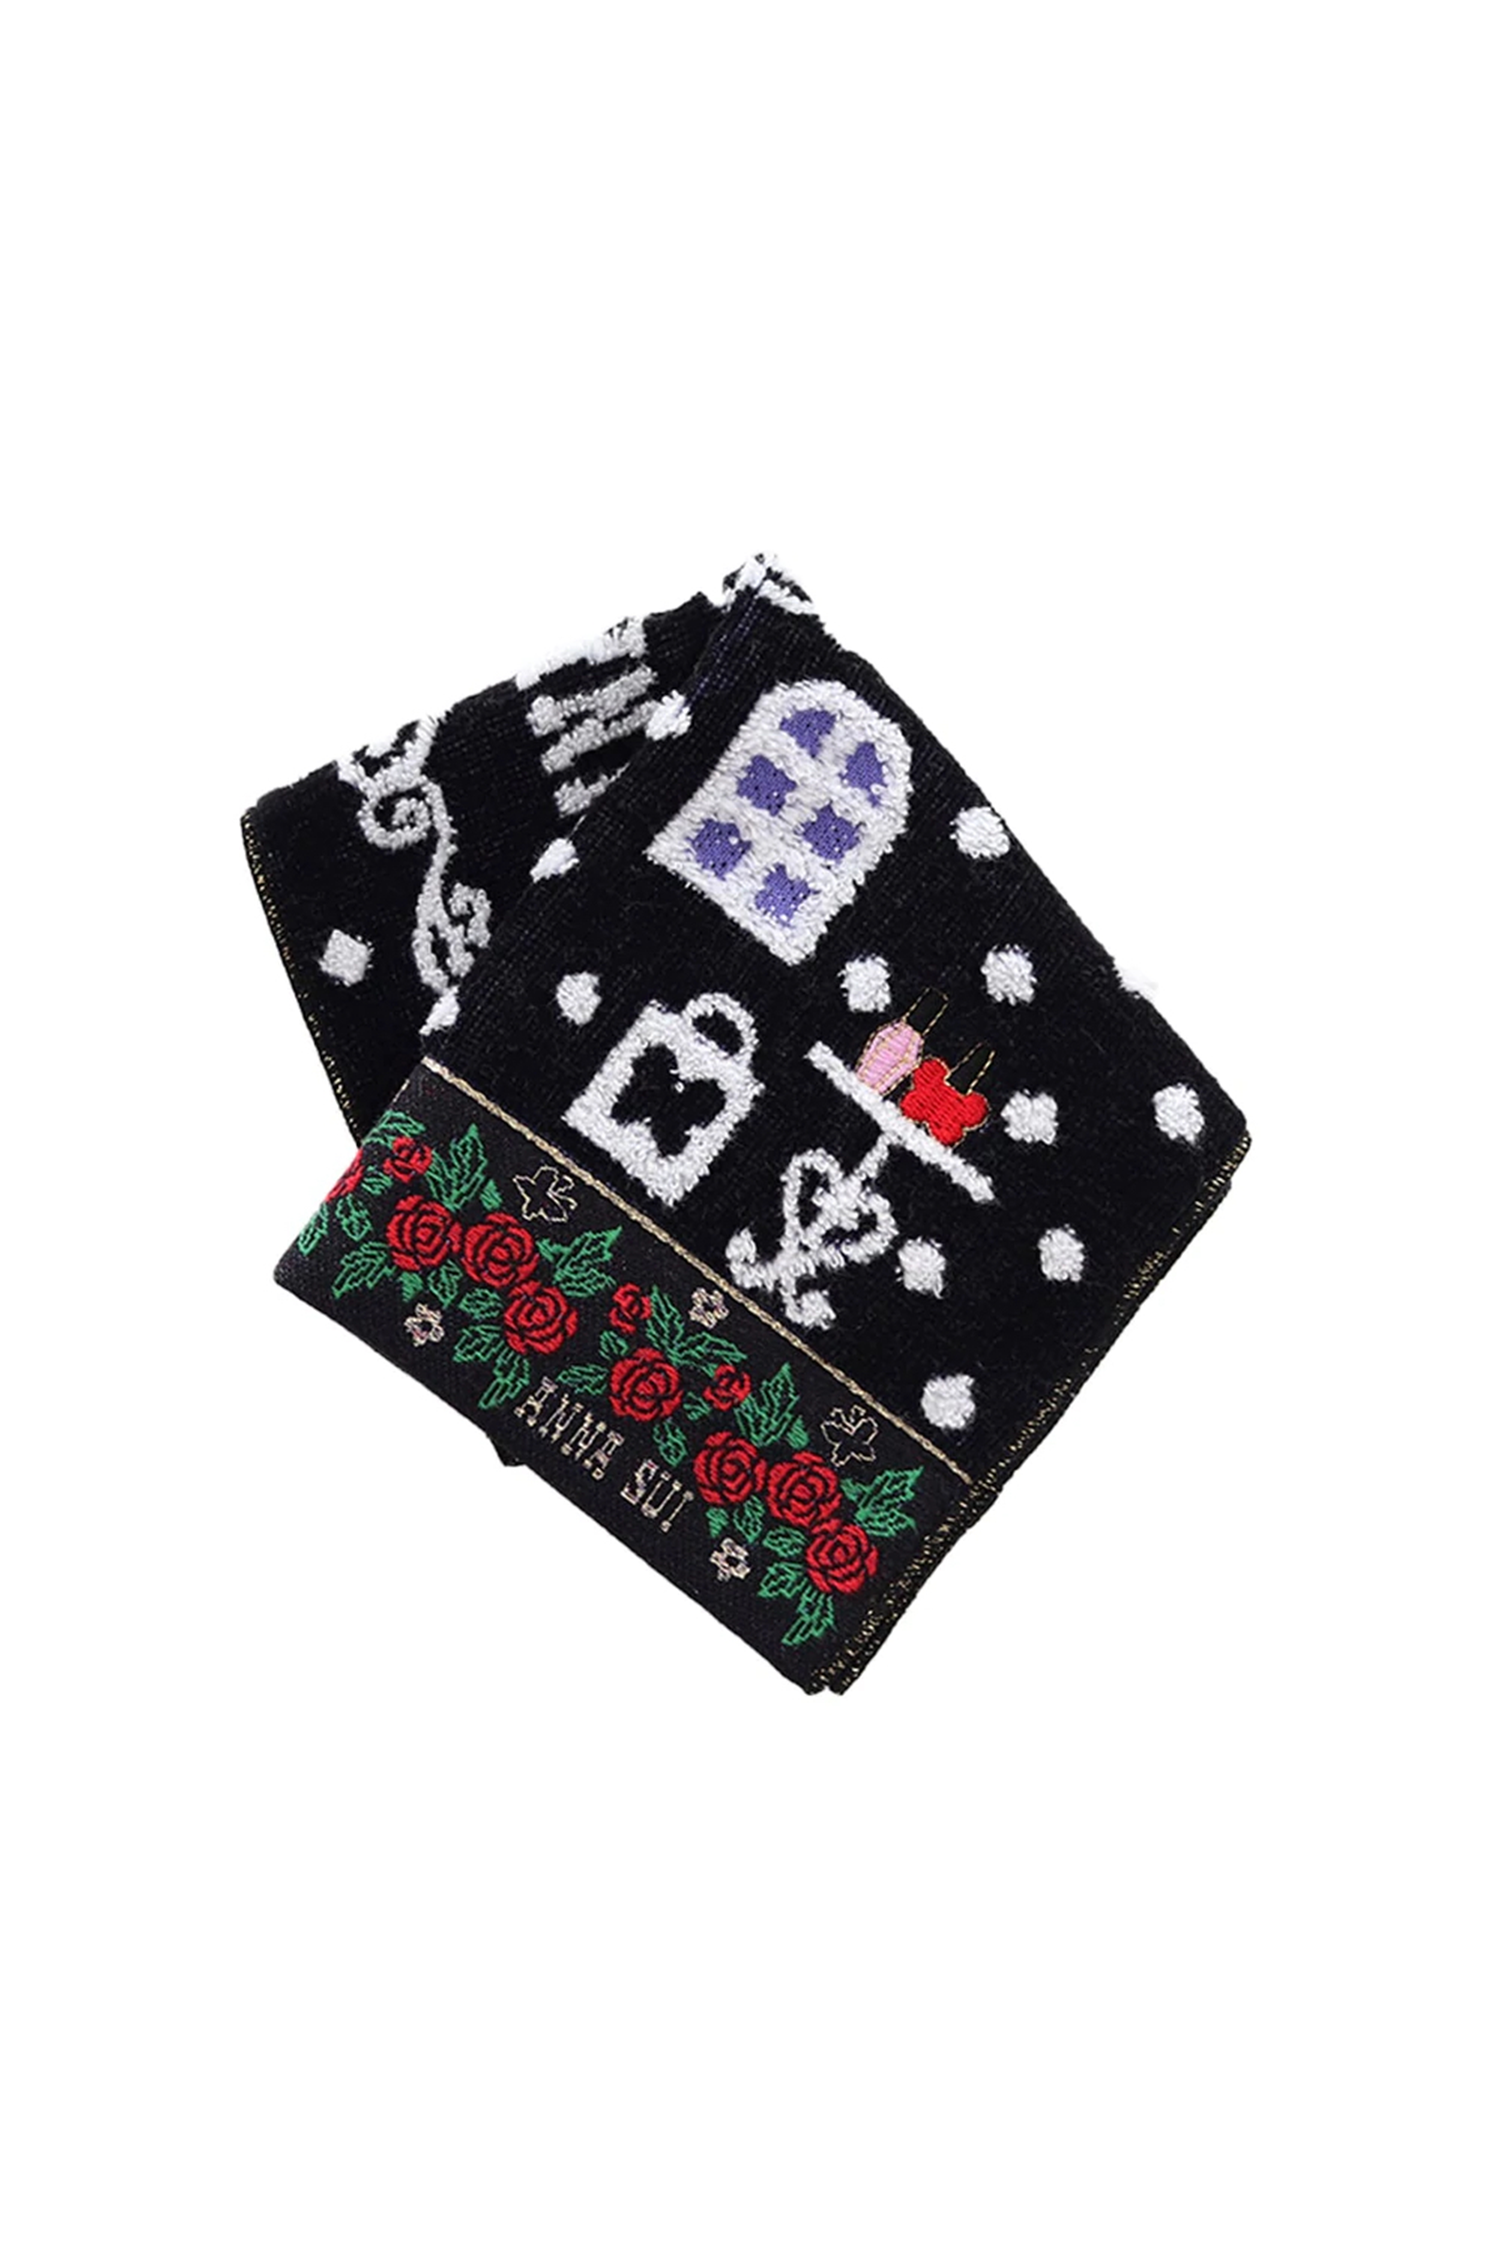 Washcloth, squared black, white shop design, white Anna Sui label on bottom with red roses line 